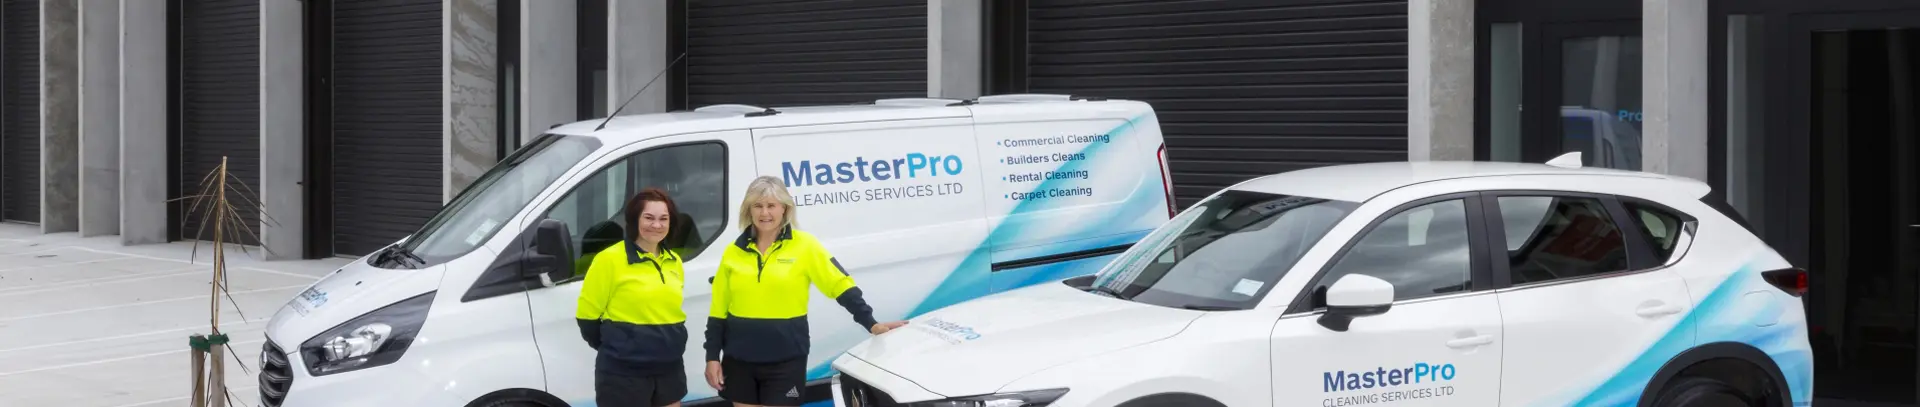 MasterPro commercial cleaning services